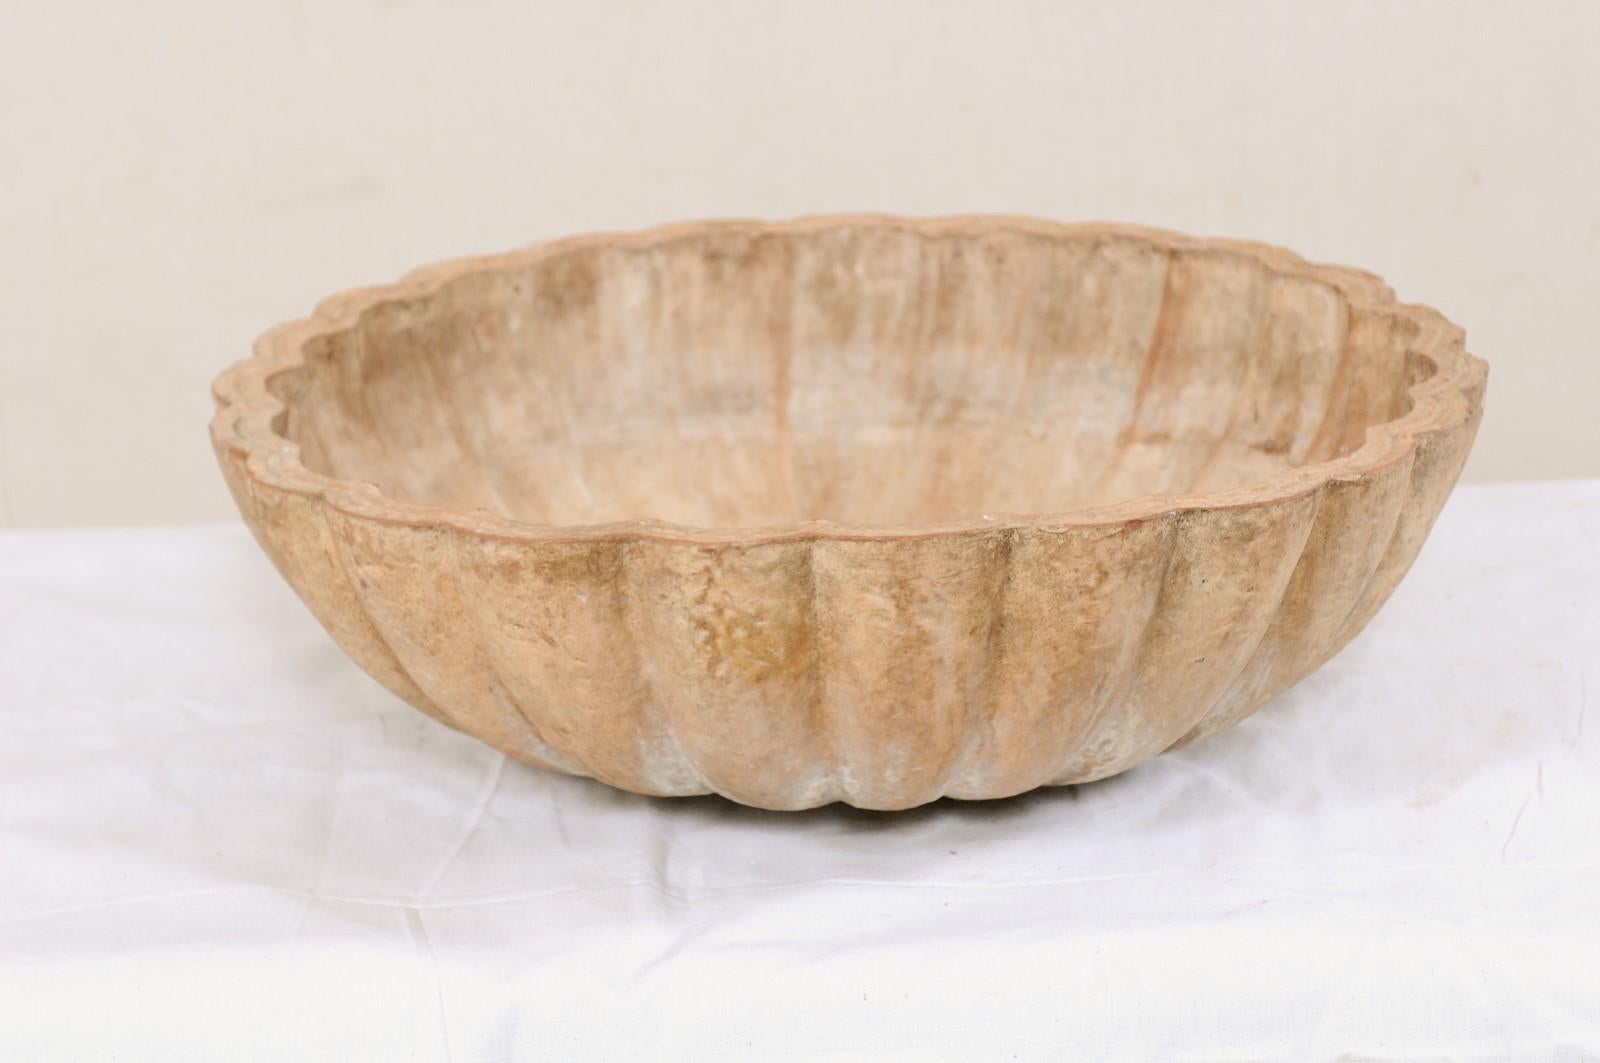 A European terracotta basin from the early 20th century. This antique fountain sink from Europe has a round-shape, with scalloped movement about the outer and inner perimeter. The coloring is subtle warm and cool tones with a nicely aged patina. A